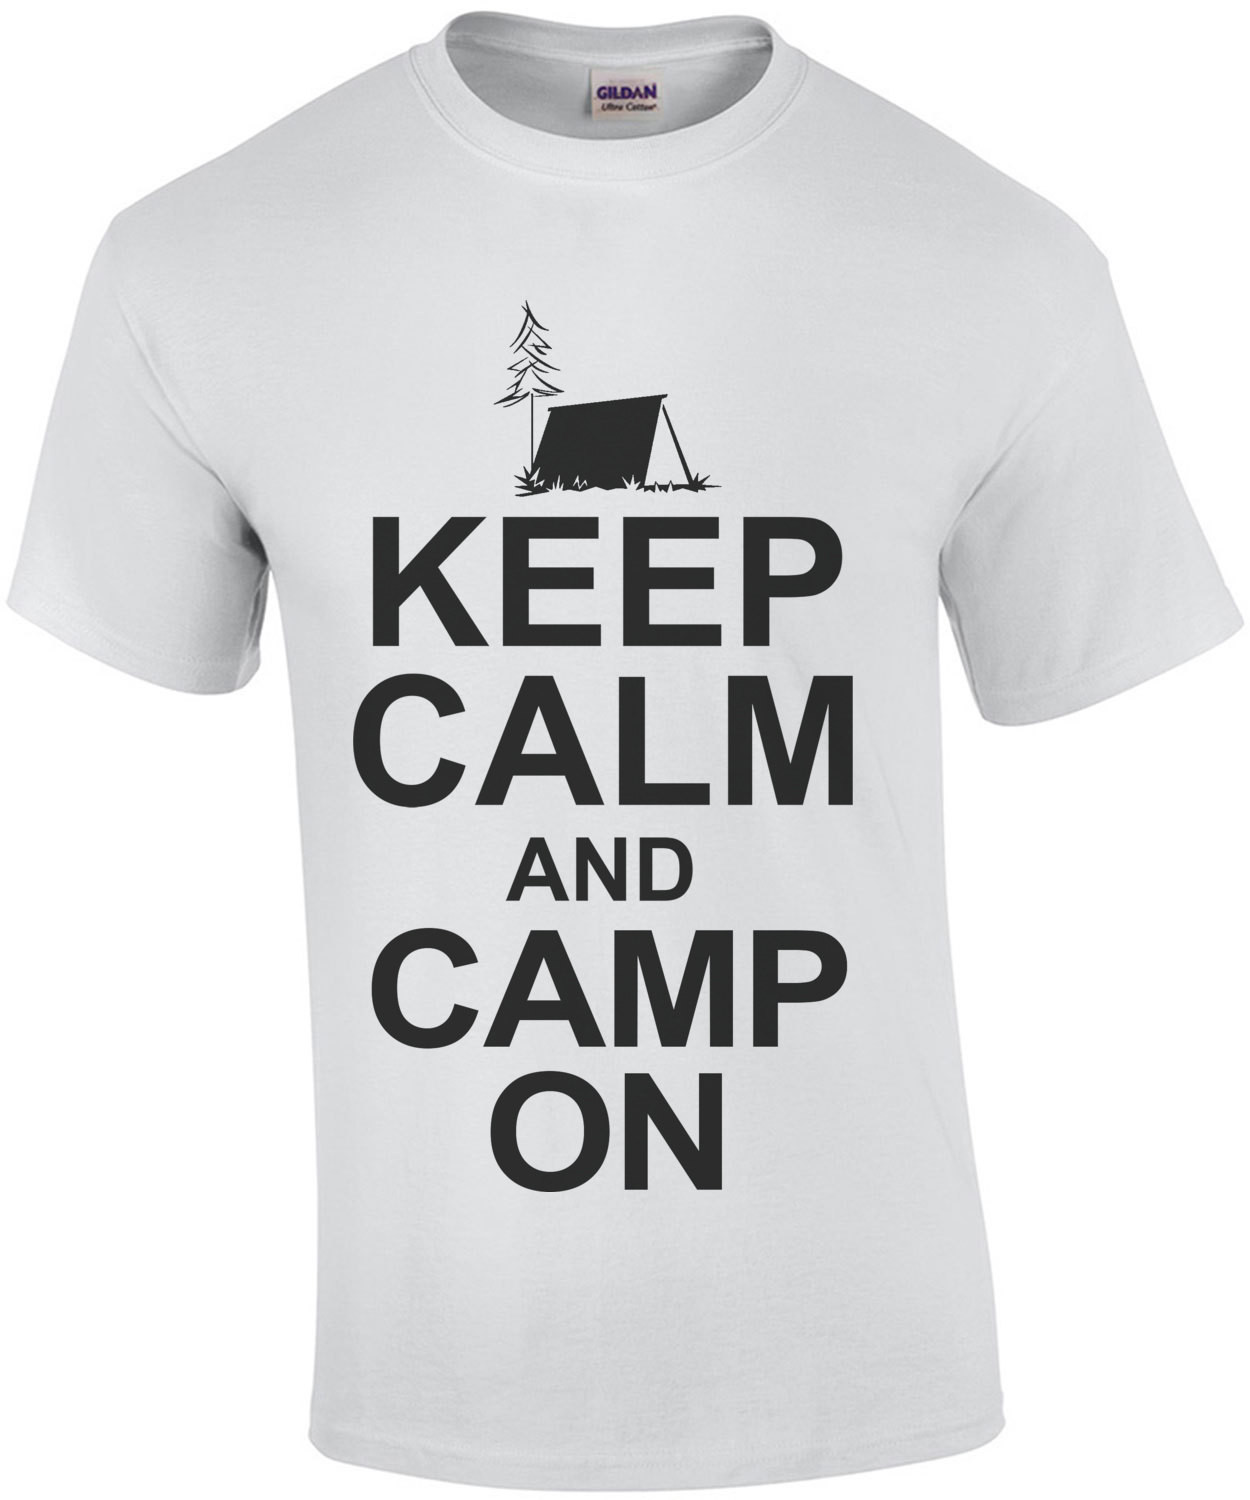 Keep Calm And Camp On T-Shirt